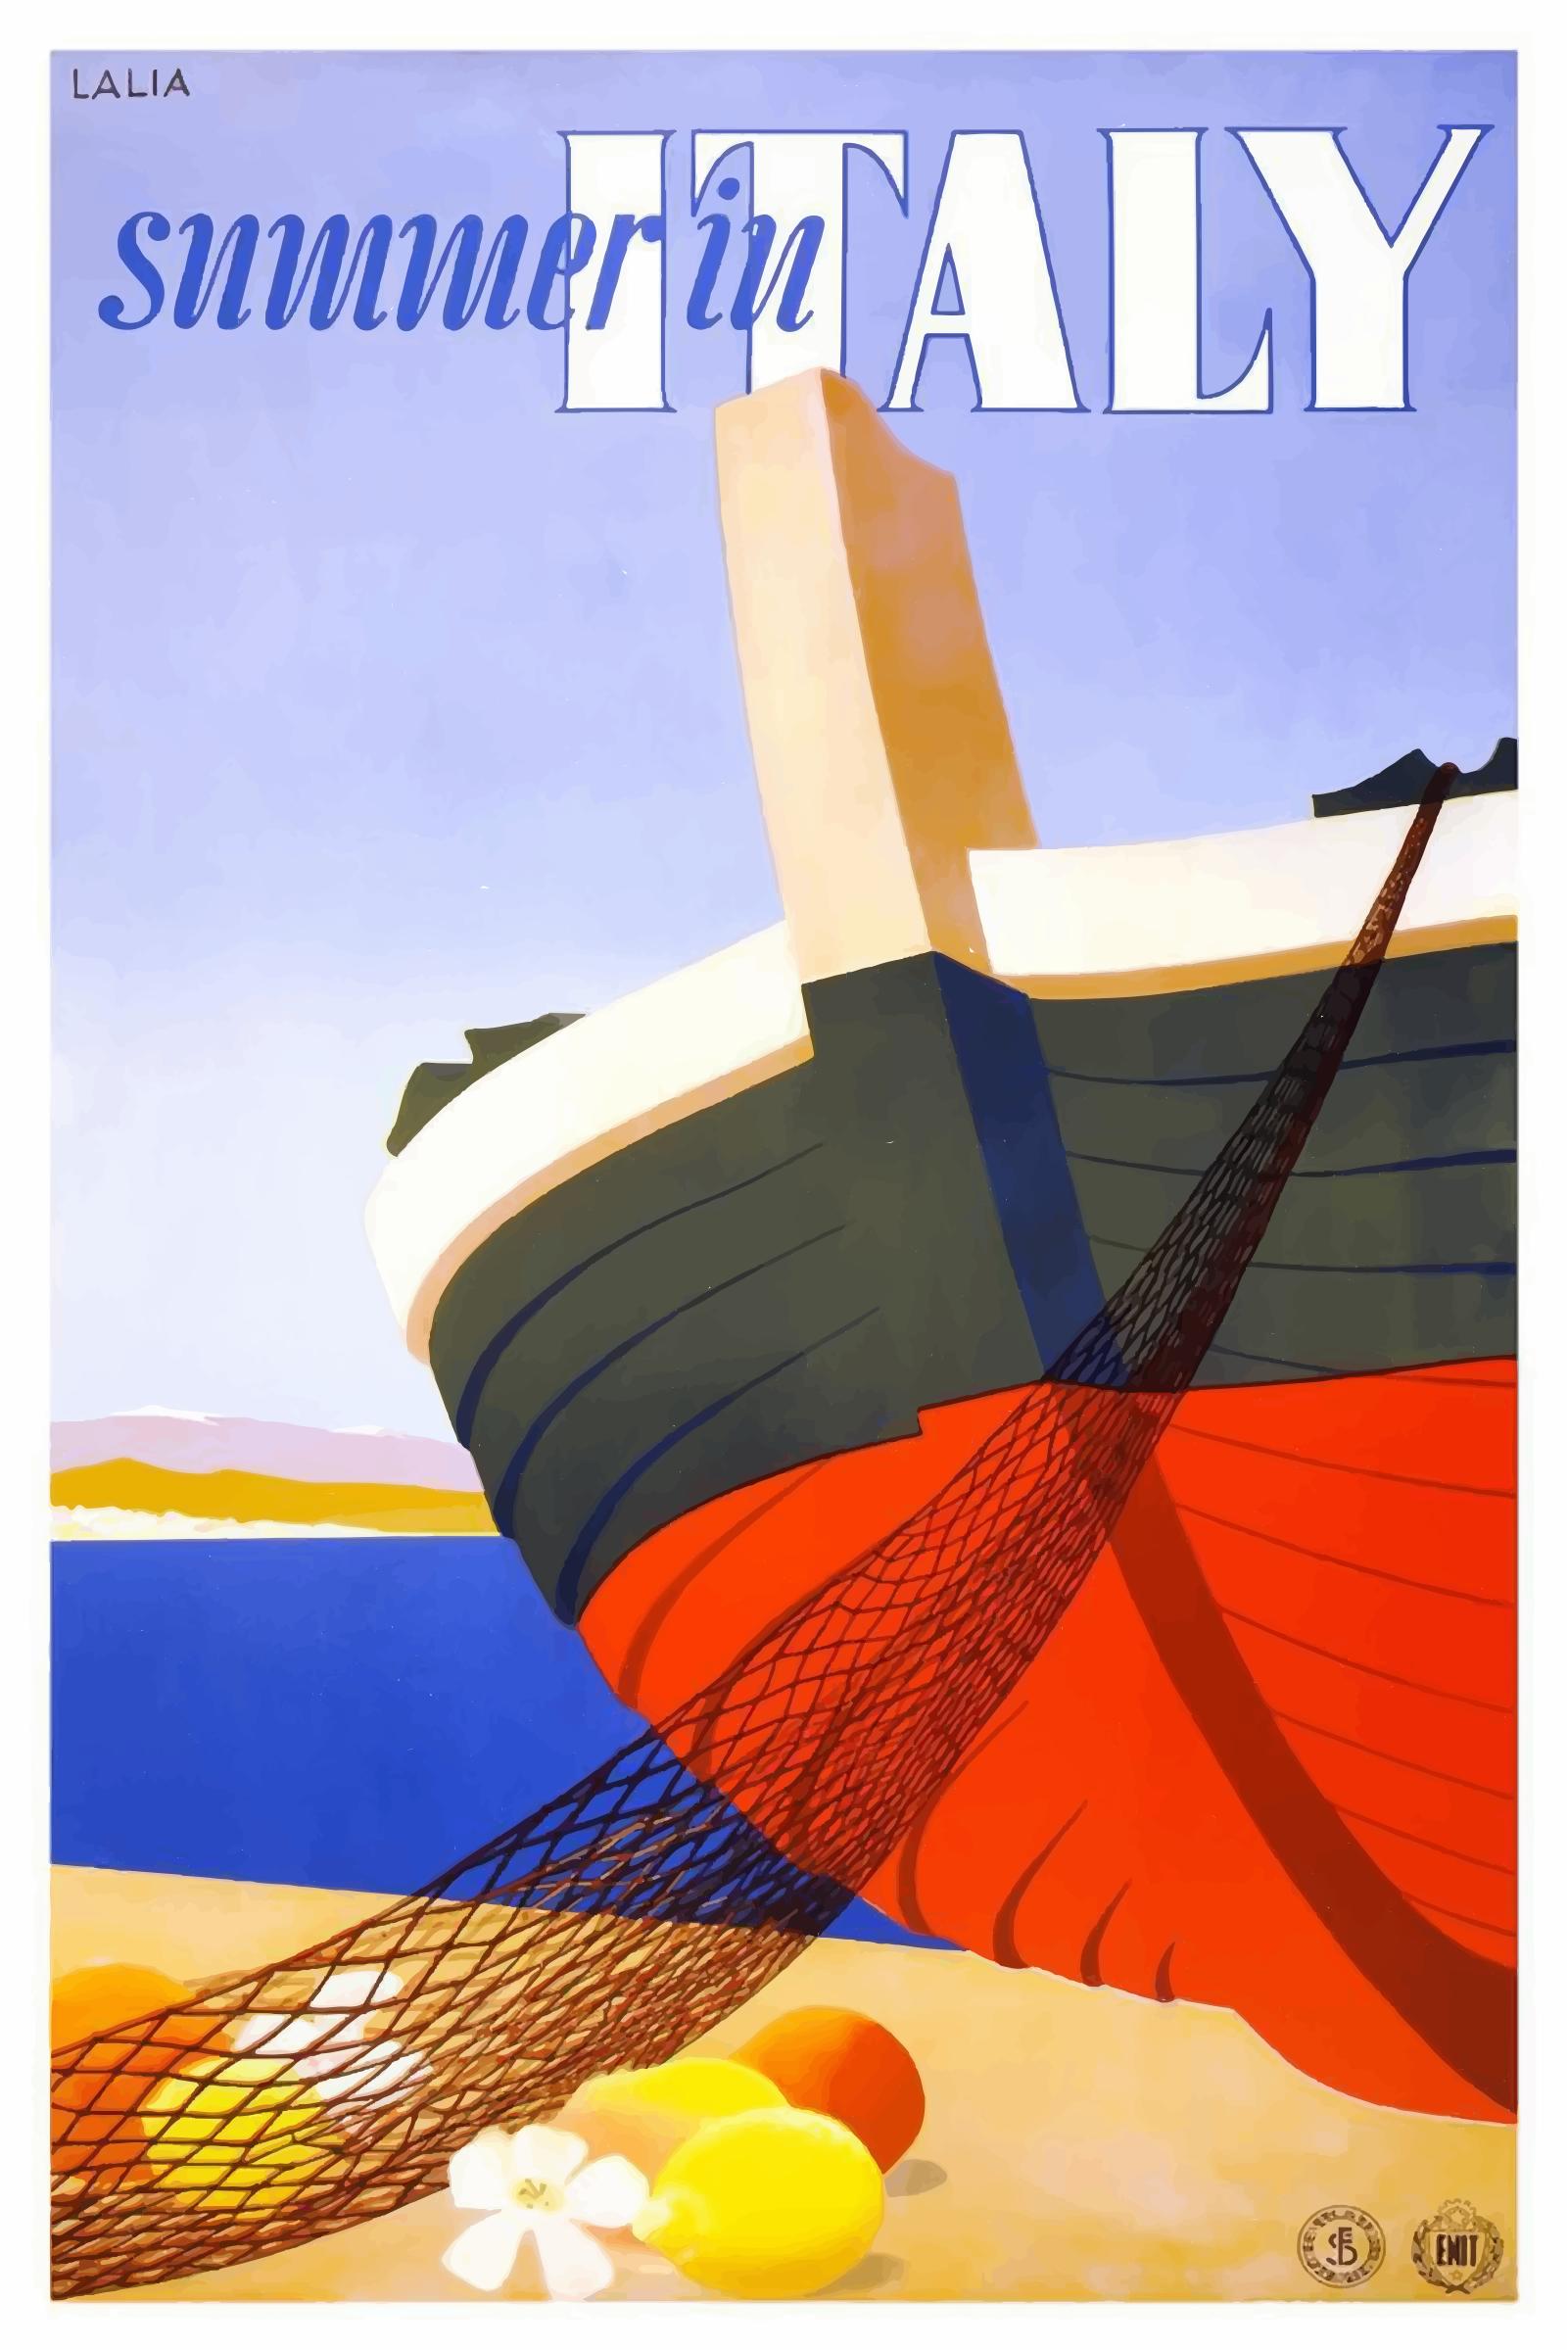 Vintage Travel Poster Italy png